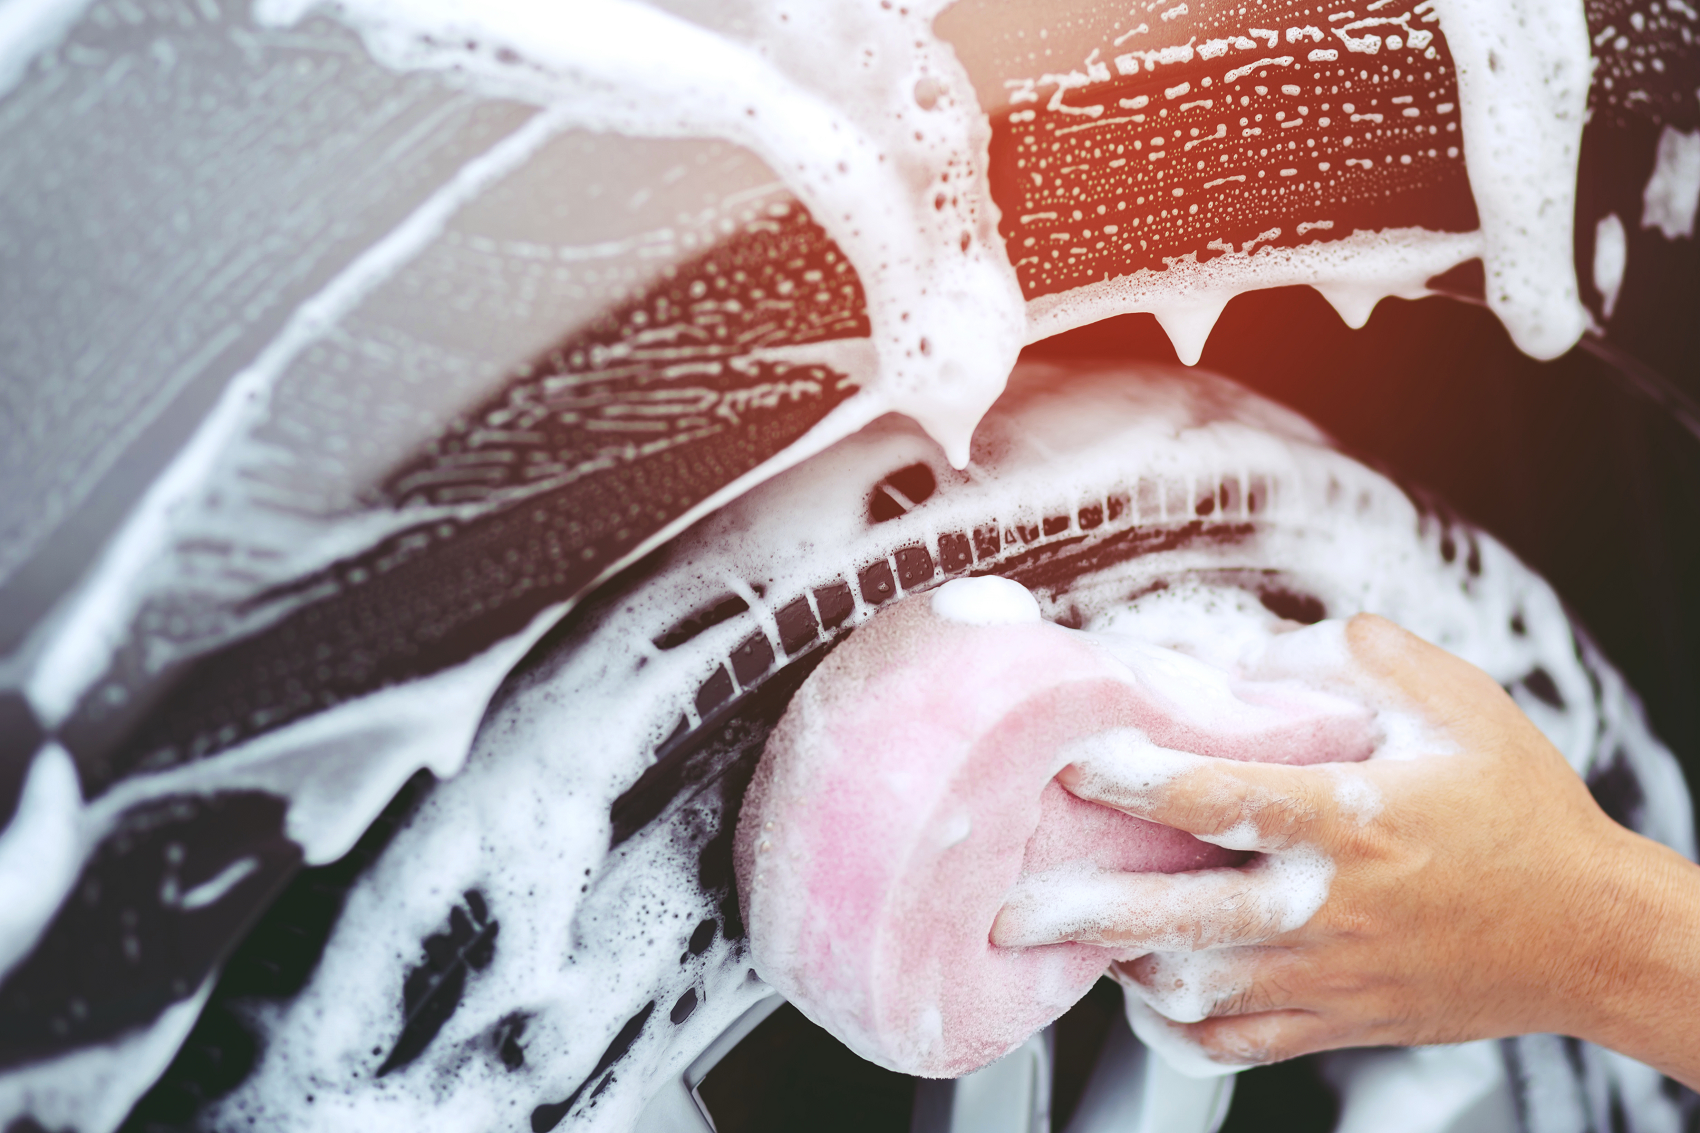 Man hand washing car tires with a sponge